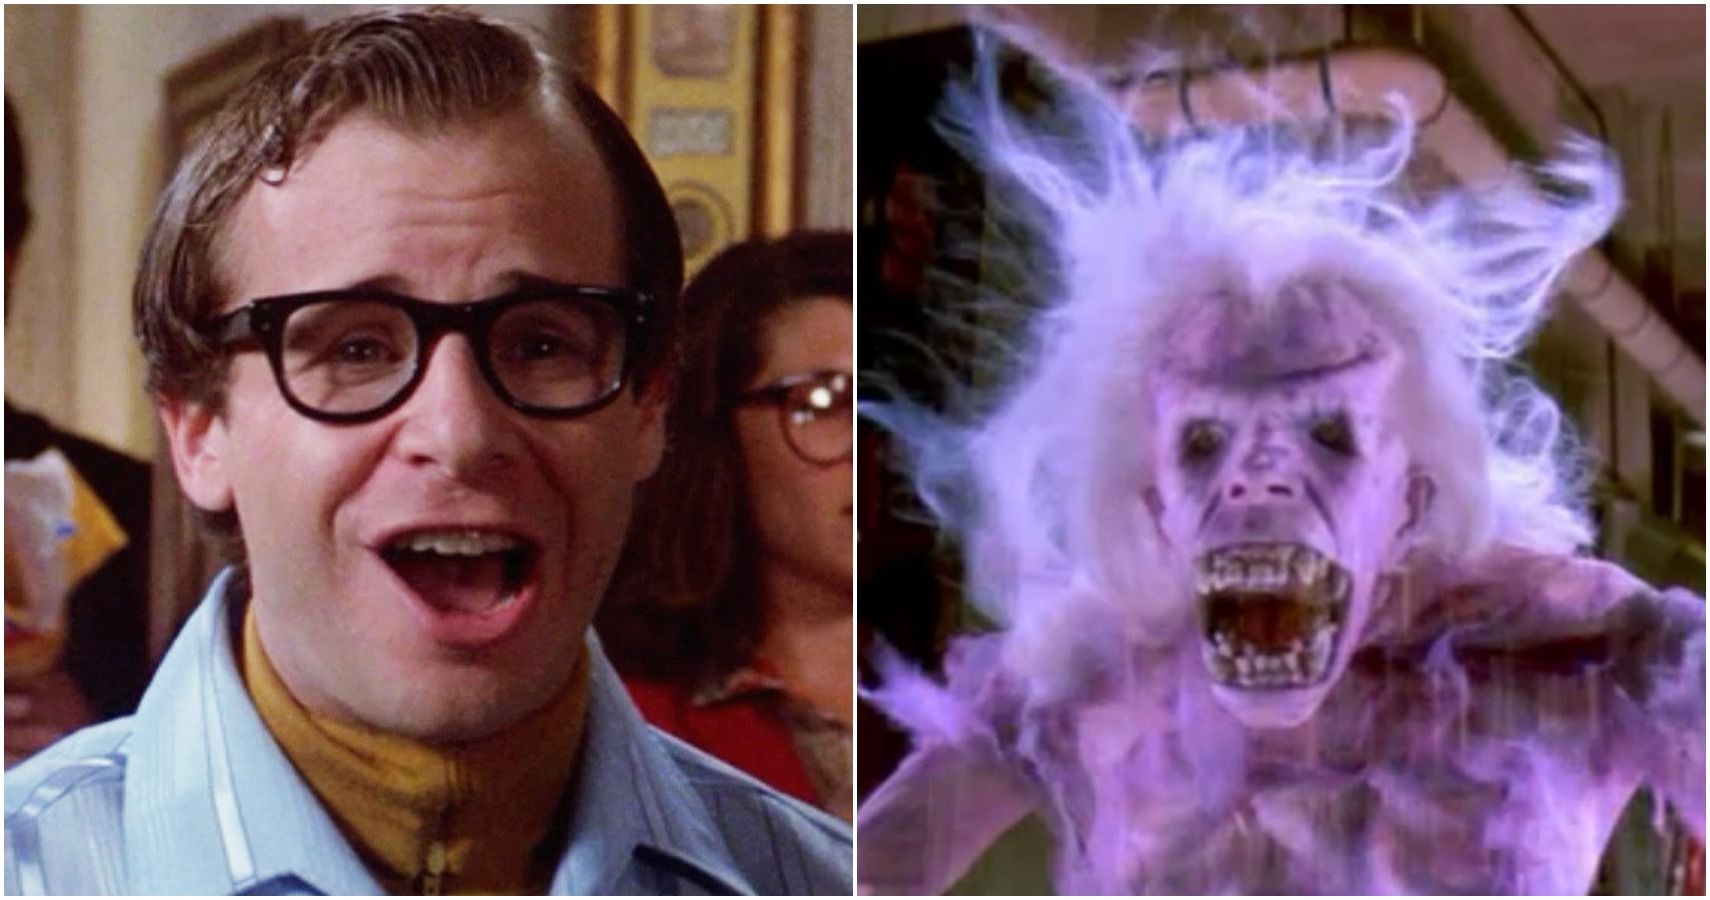 The 5 Funniest Scenes In Ghostbusters And 5 That Were Legitimately Creepy